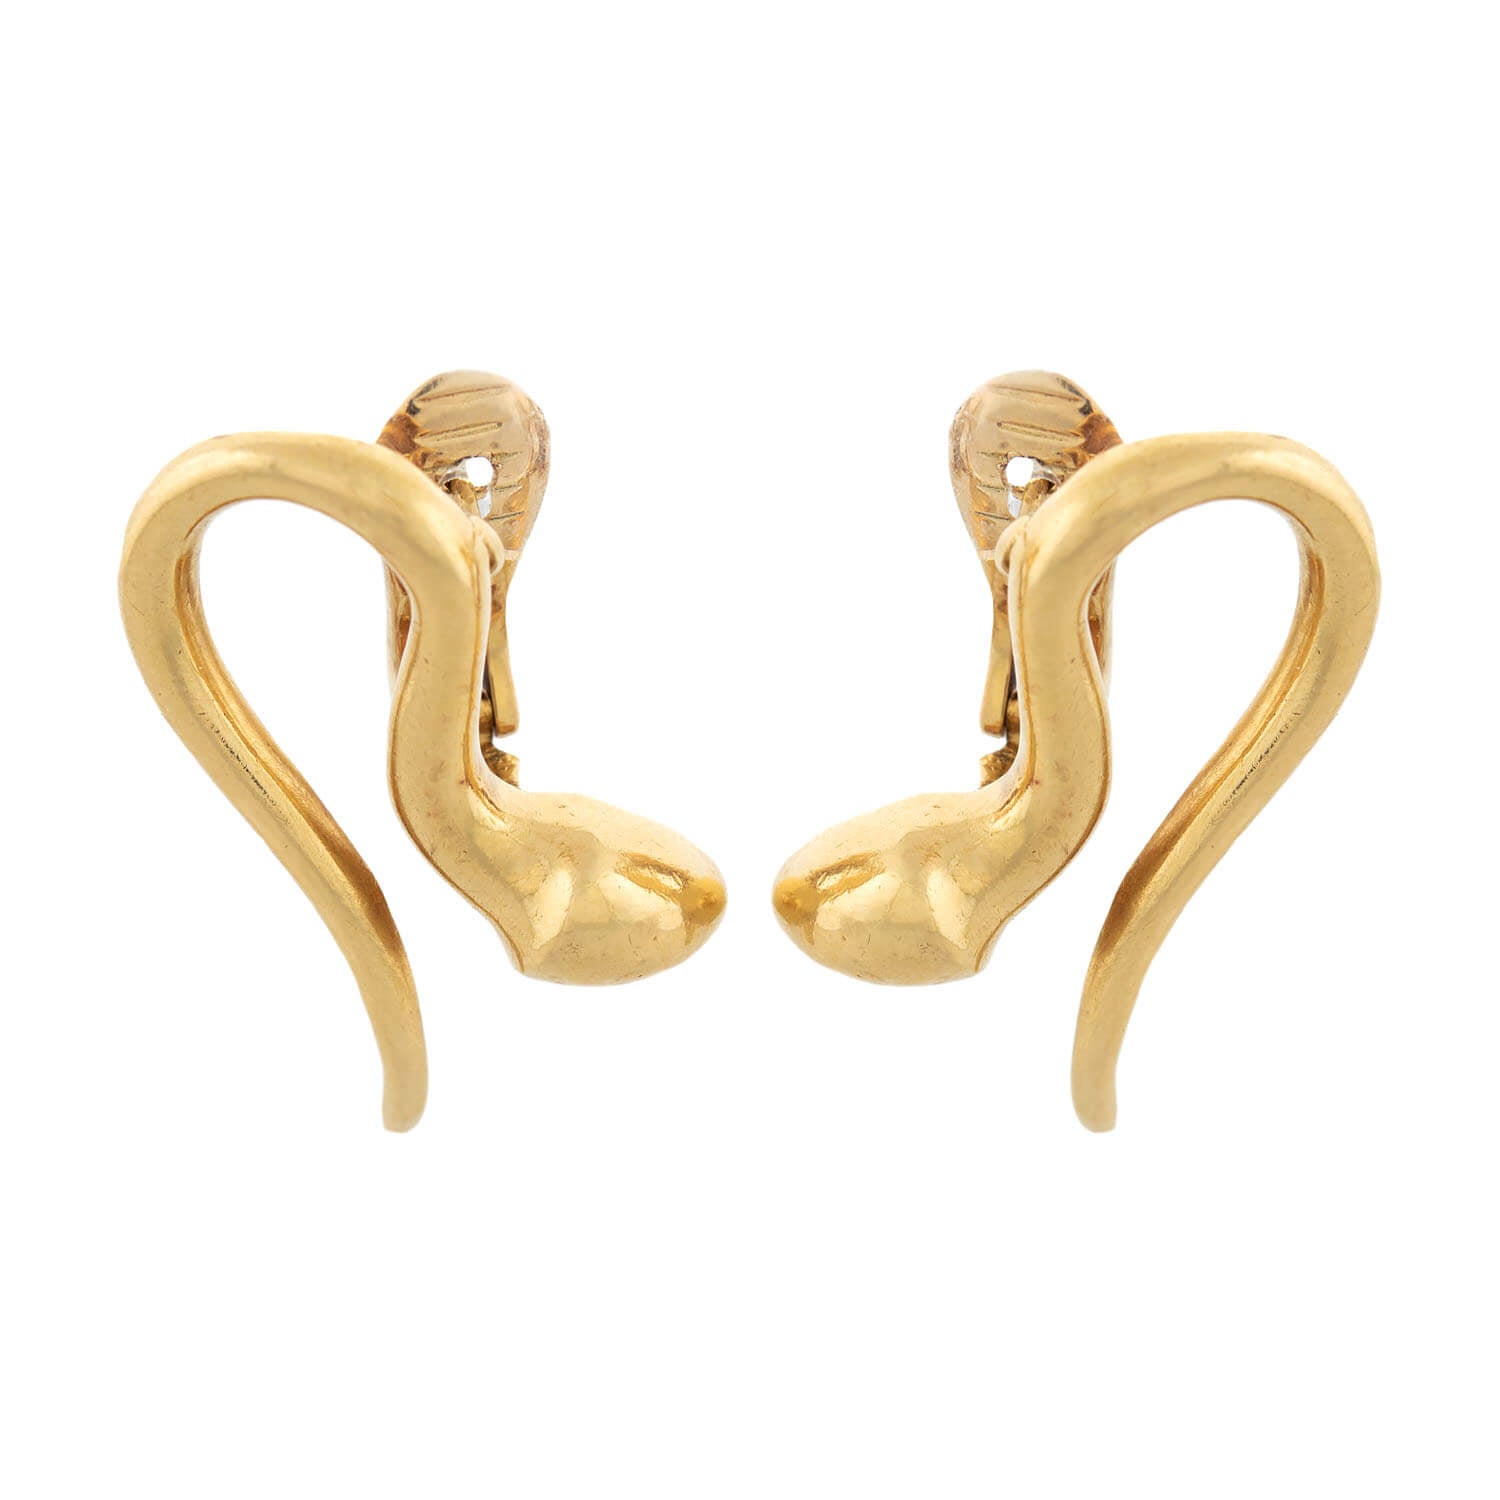 LALAOUNIS Estate 18k Gold Abstract Snake Earrings